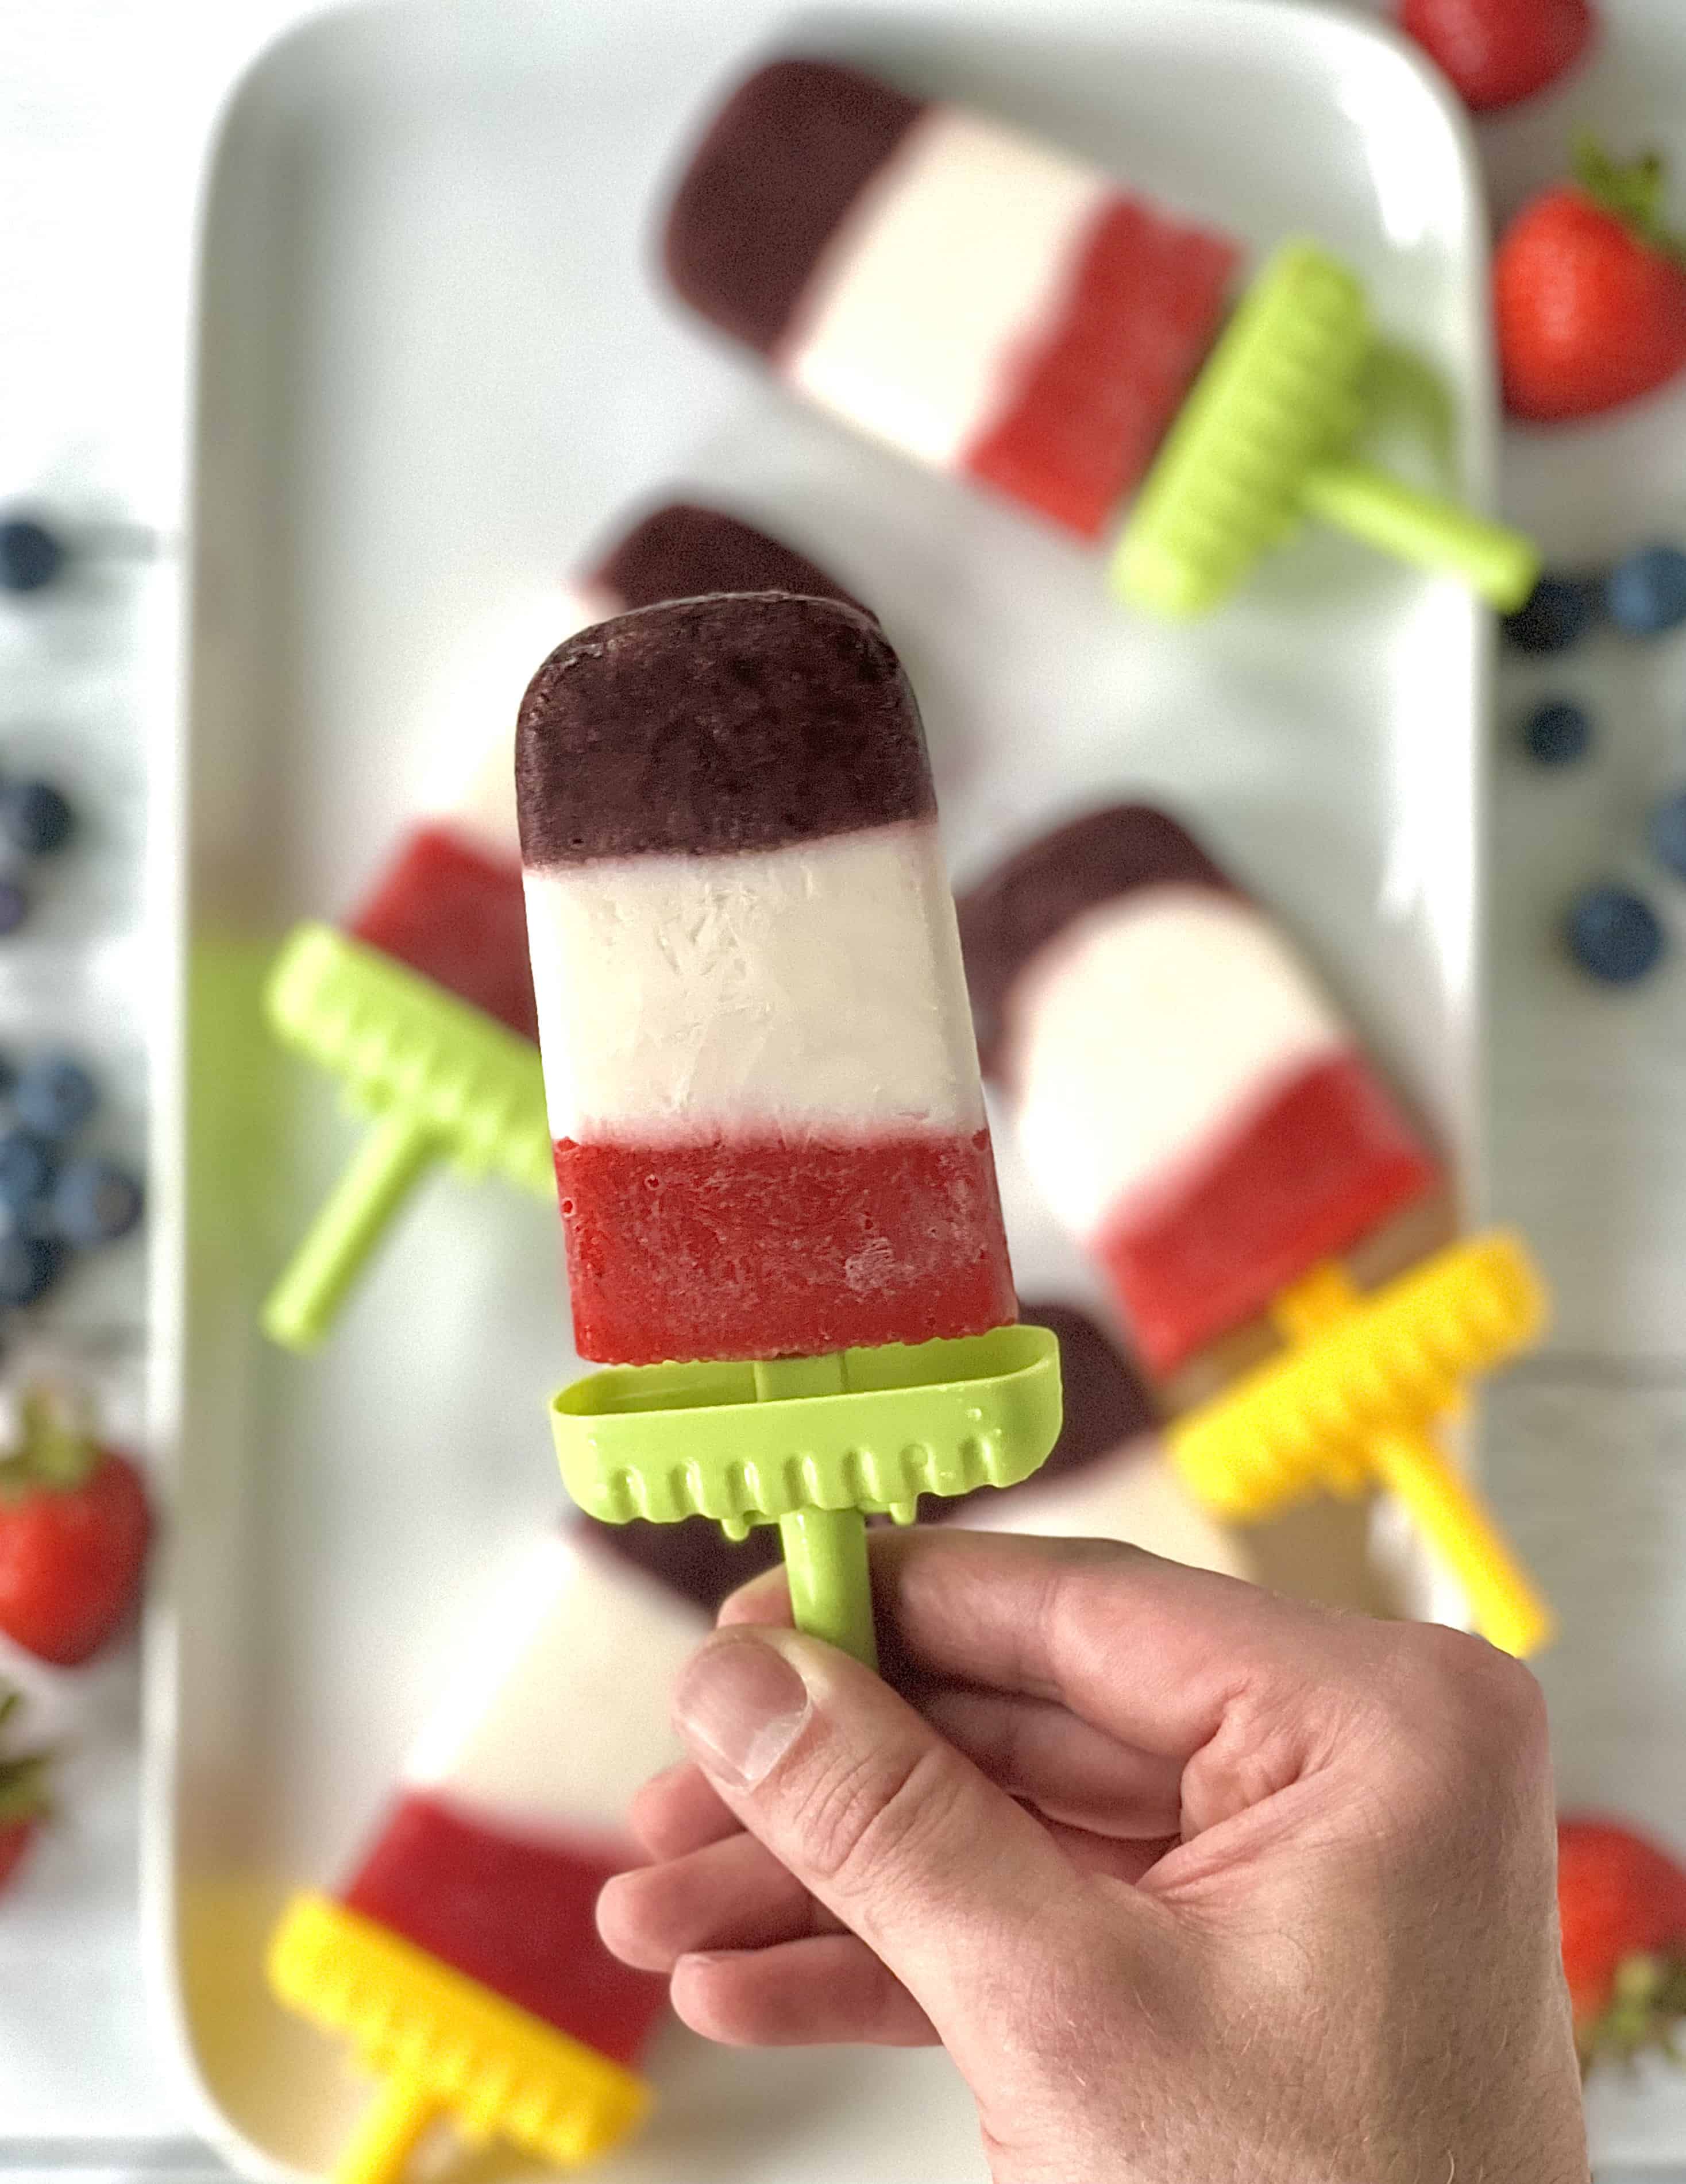 a hand holding up a real fruit popsicle with layers of blueberries, strawberries and yogurt above a white platter of more popsicles